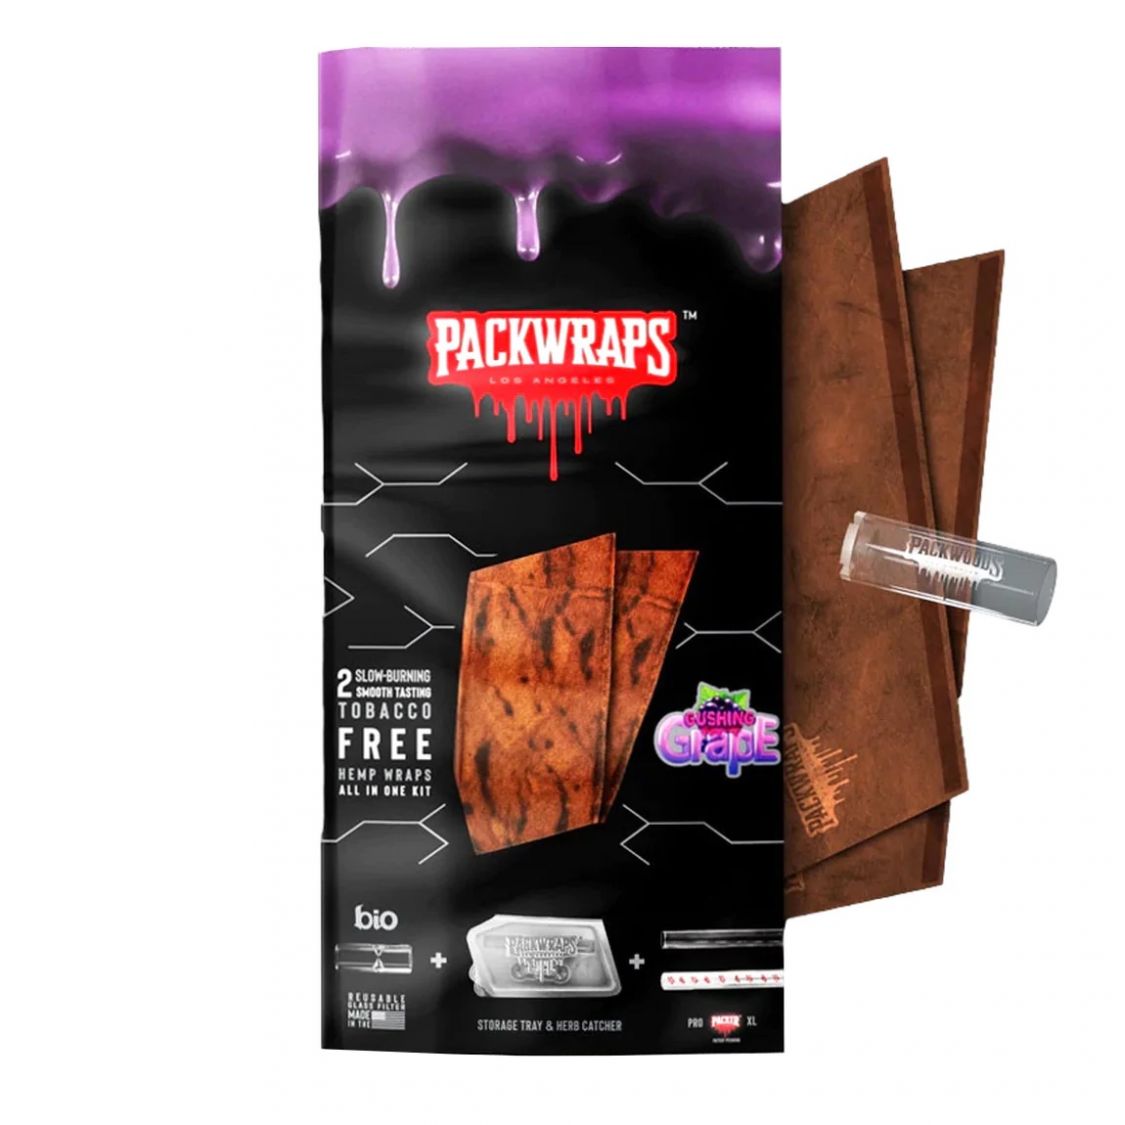 PACKWRAPS Grape Packwraps Accessories Paper / Rolling Supplies